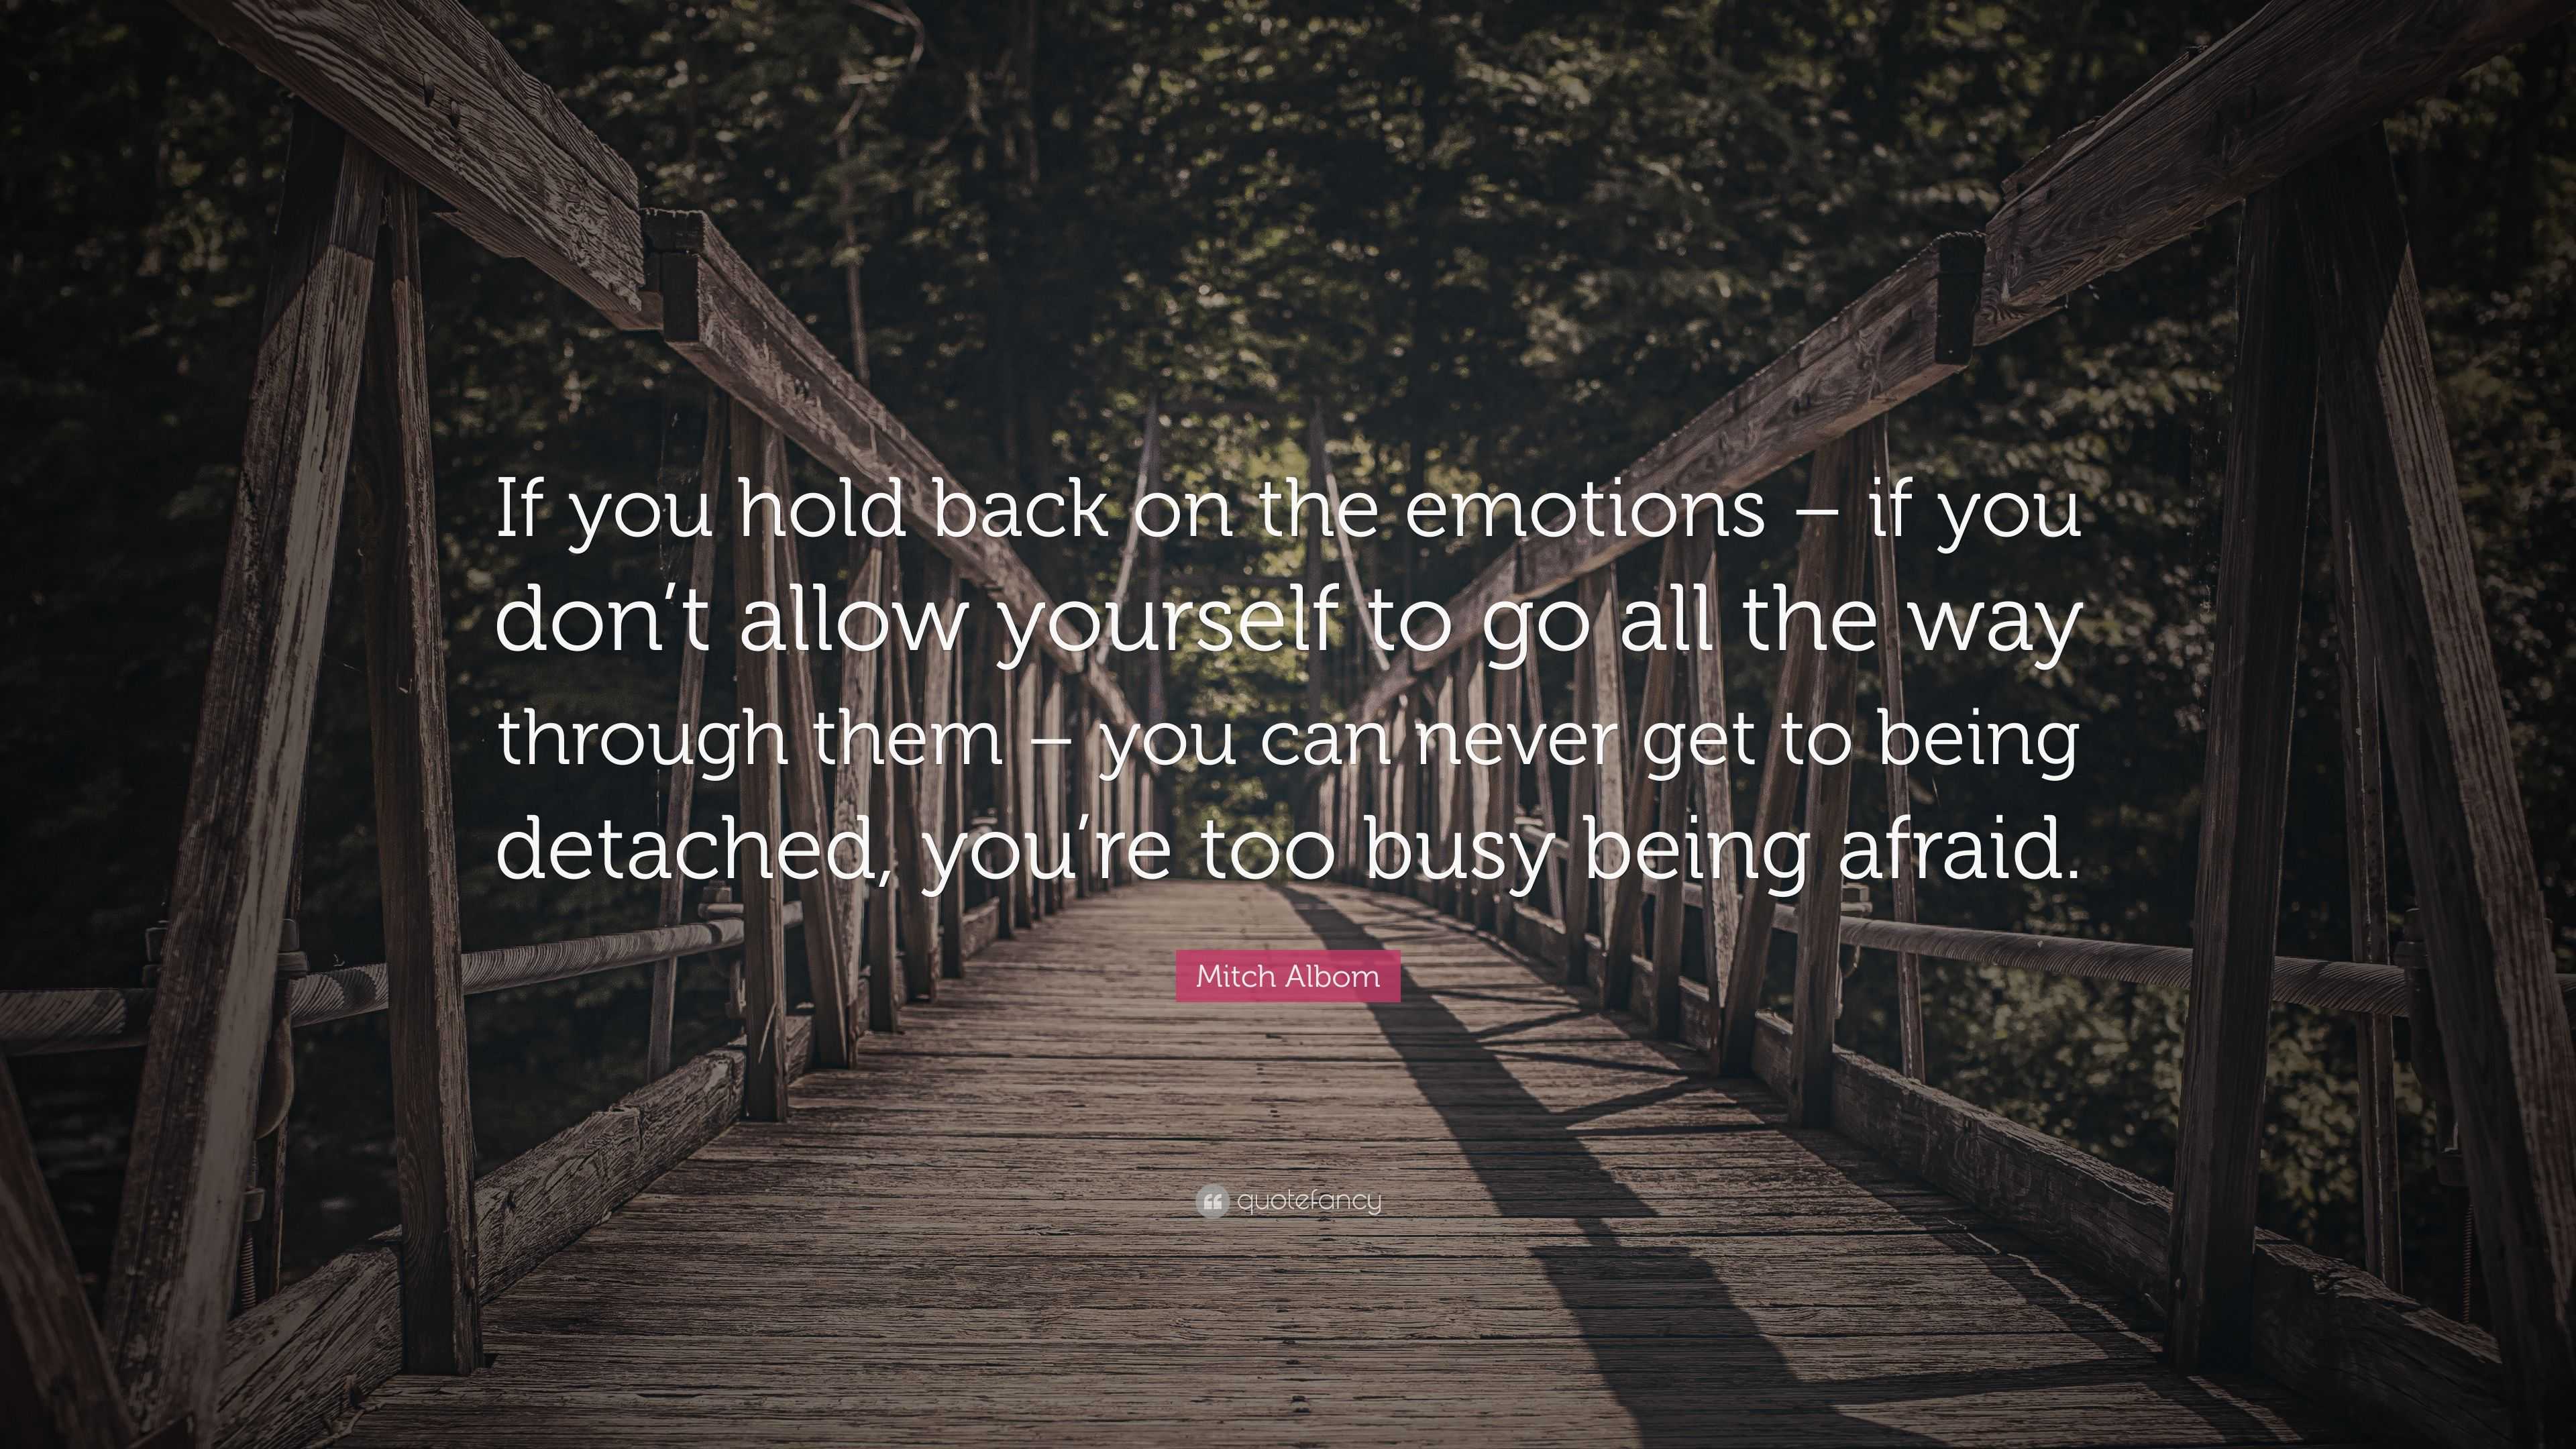 Mitch Albom Quote: “If you hold back on the emotions – if you don’t ...